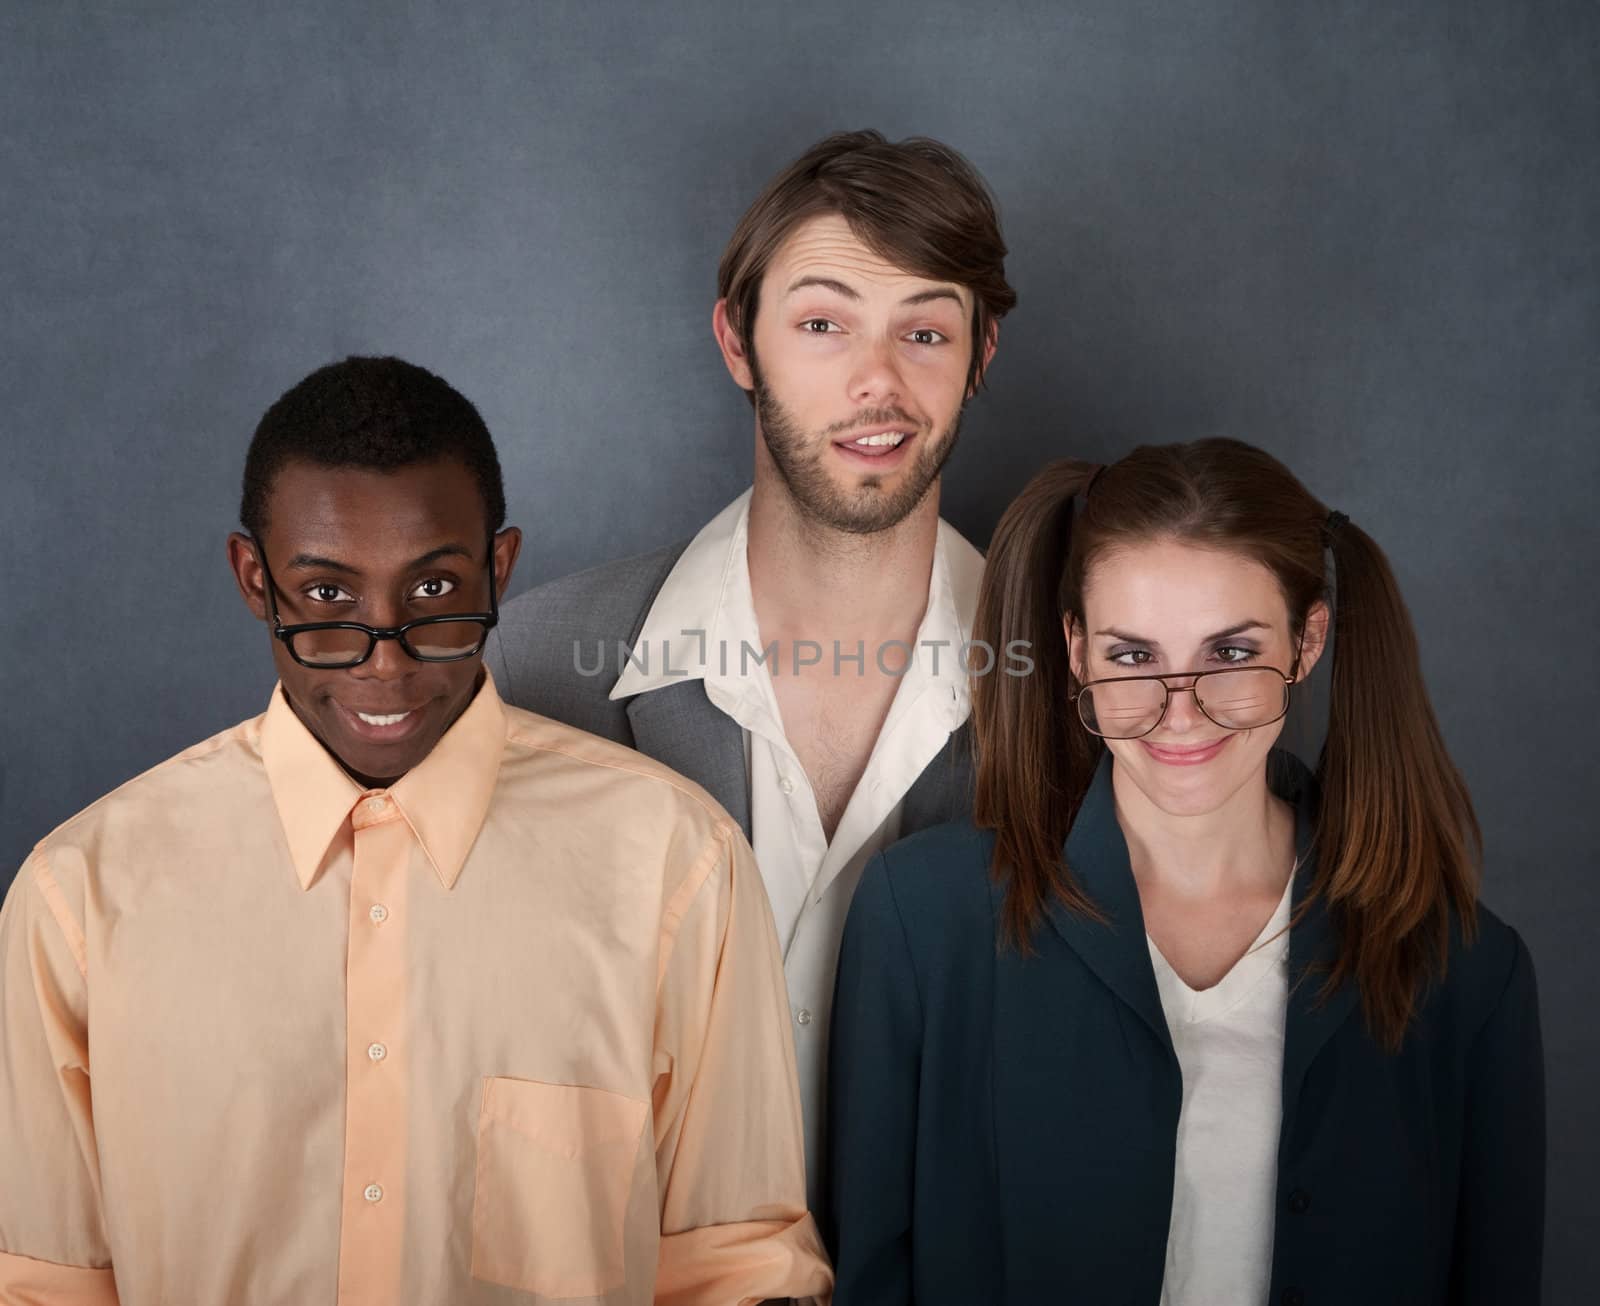 Mixed group of geeks on gray background smiling